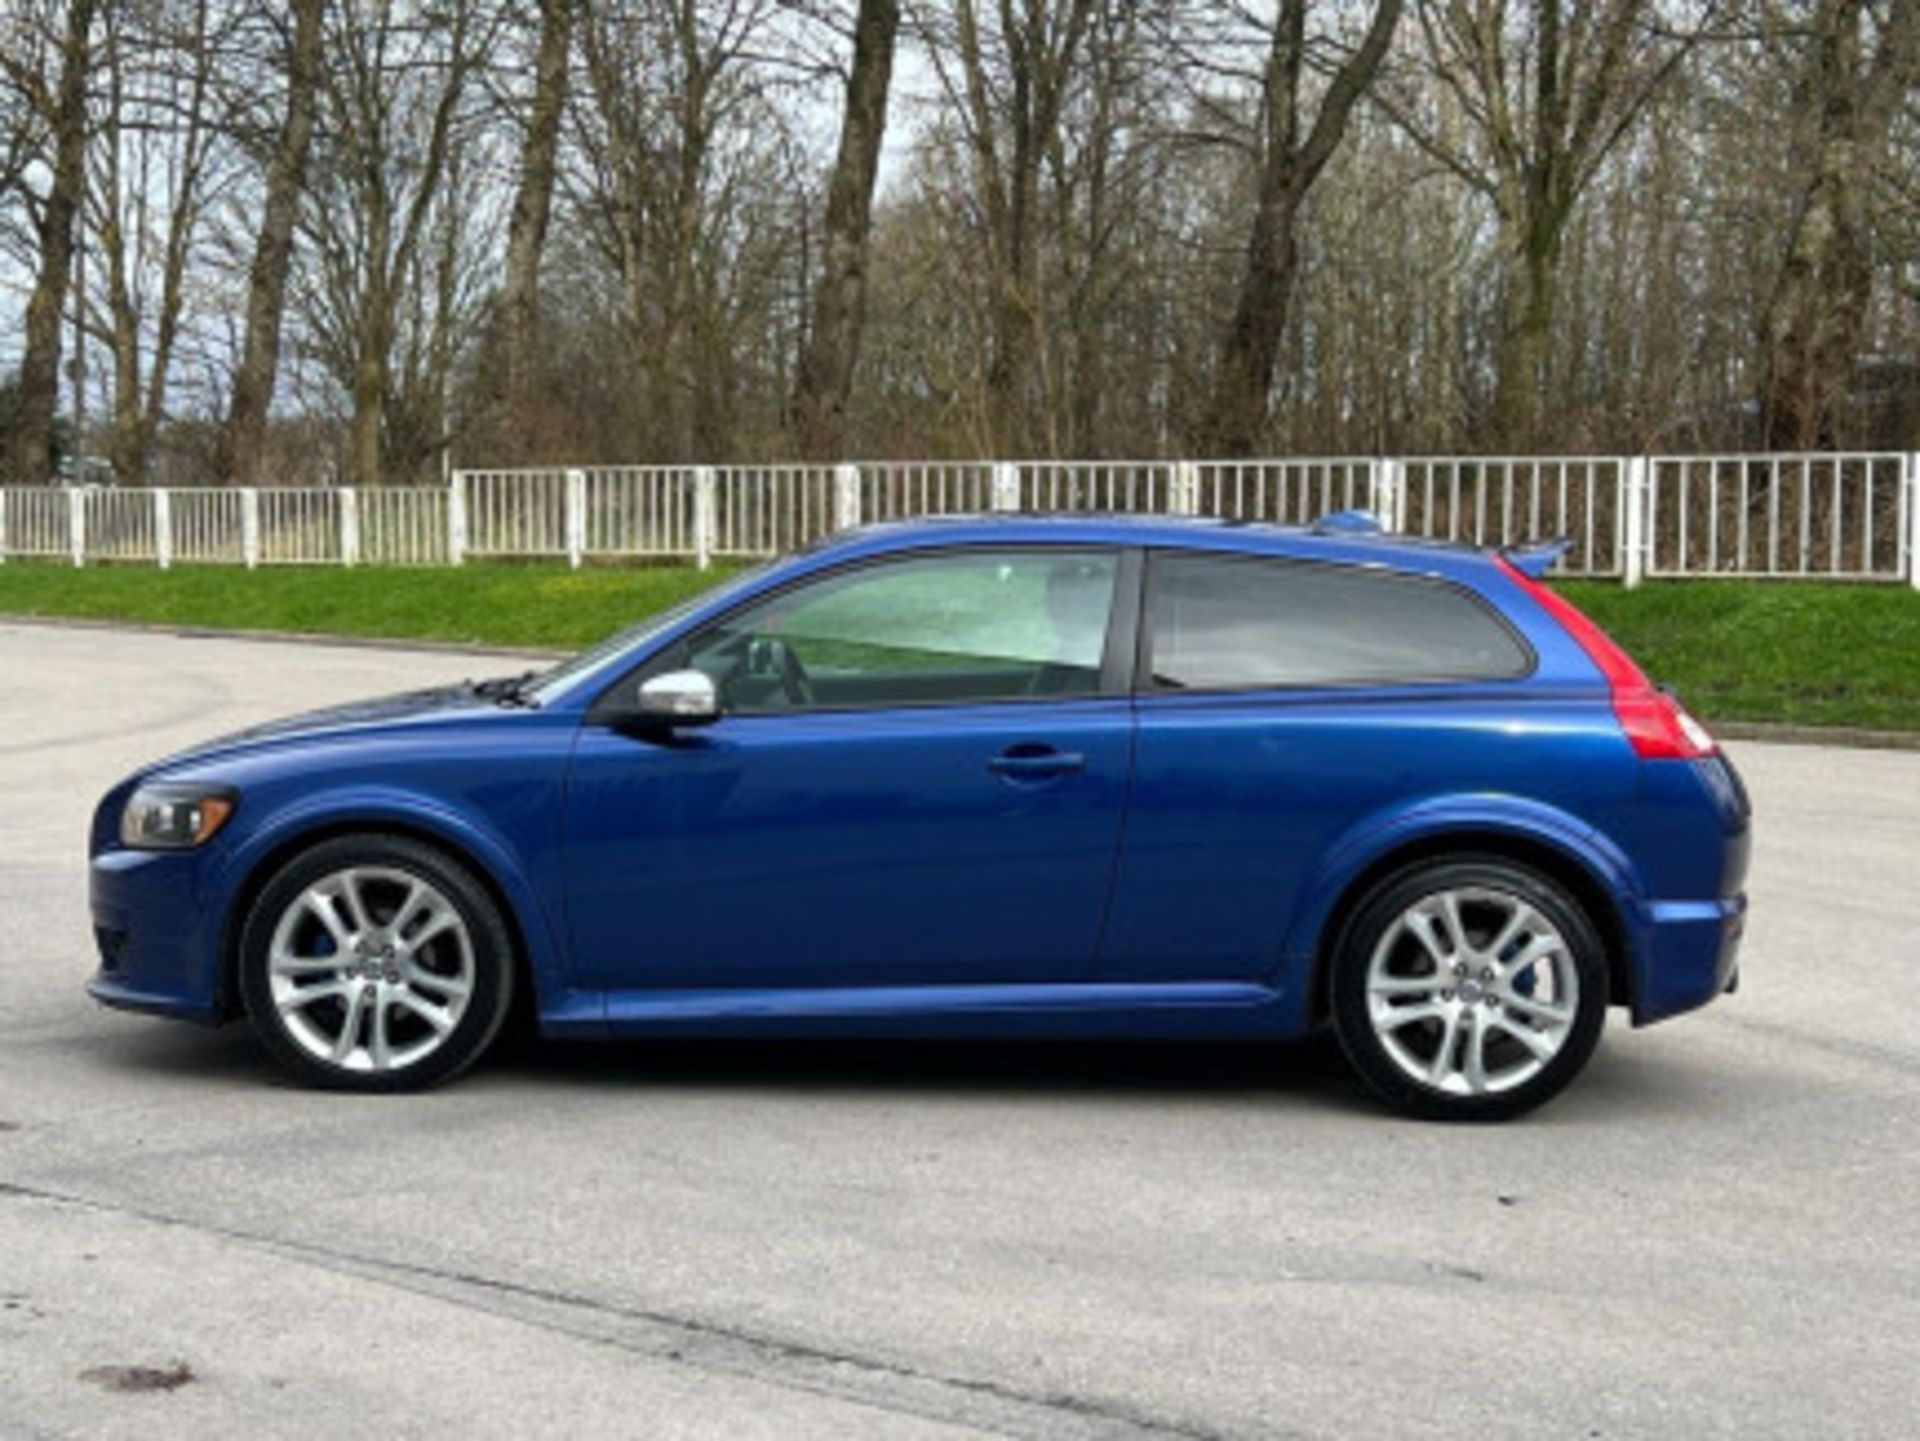 VOLVO C30 2.0D R-DESIGN SPORT 2DR - SPORTY AND LUXURIOUS COMPACT CAR >>--NO VAT ON HAMMER--<< - Image 25 of 71